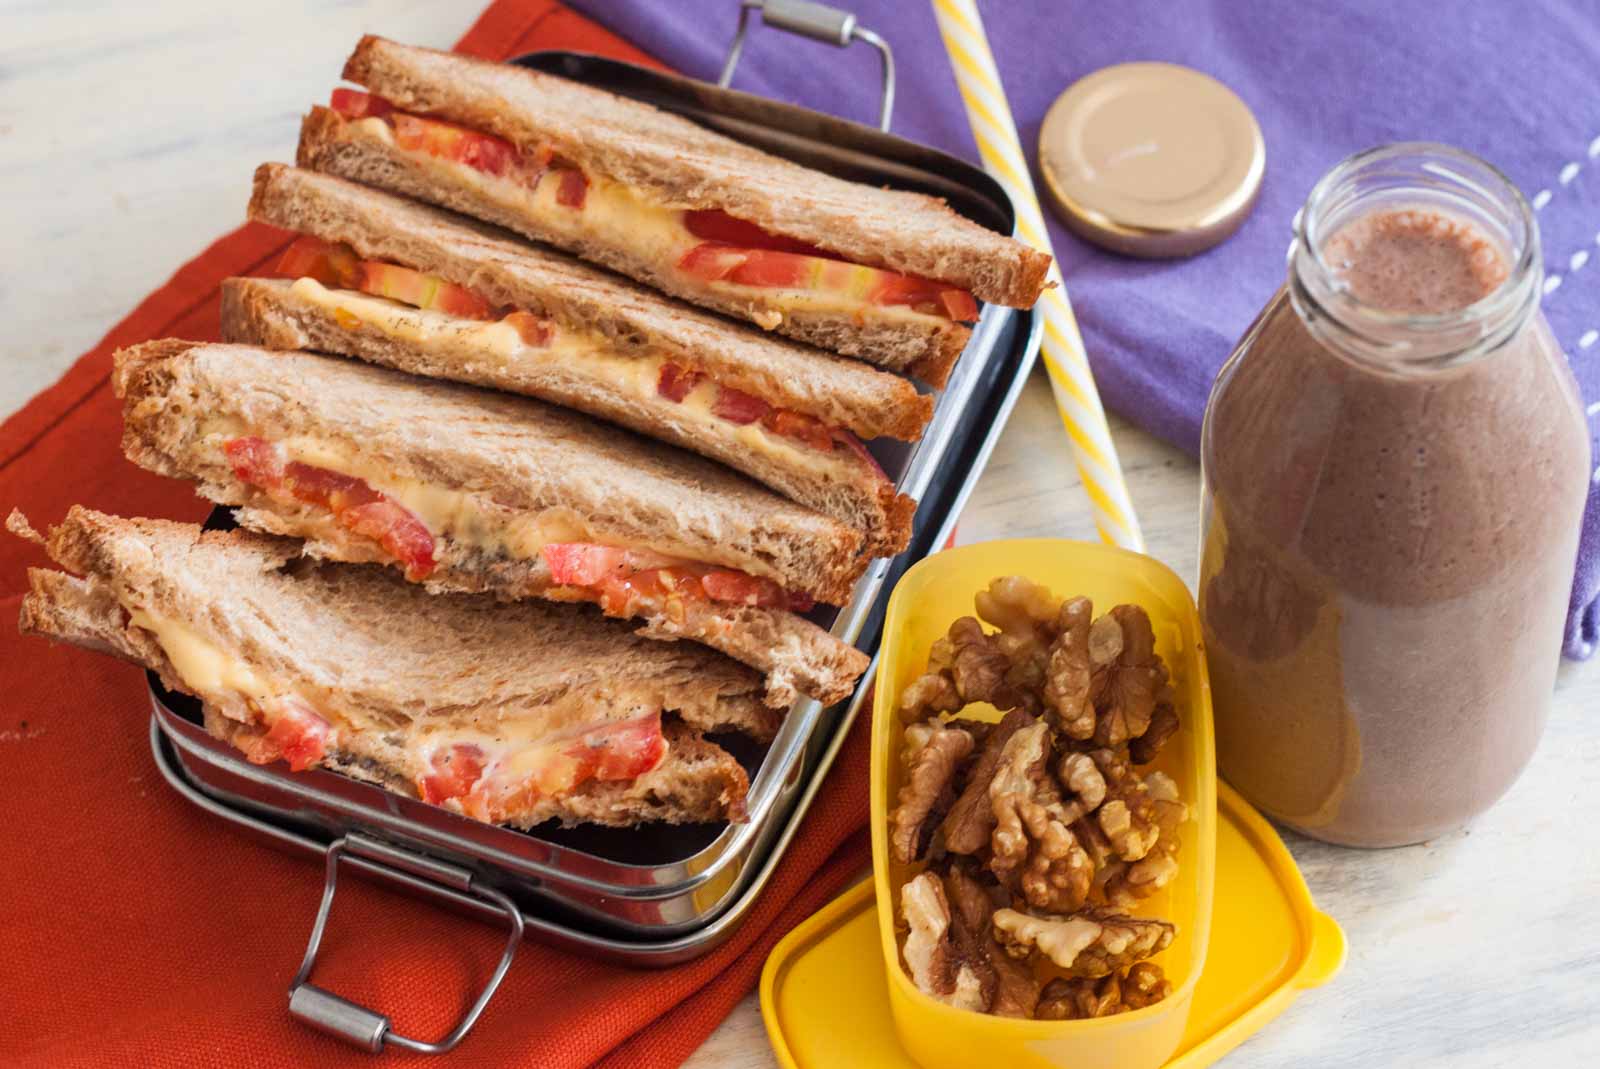 Kids_Lunch_Box_Meal_Tomato_and_Cheese_Grill_Sandwich_walnuts_banana_and_choclate_smoothie 2